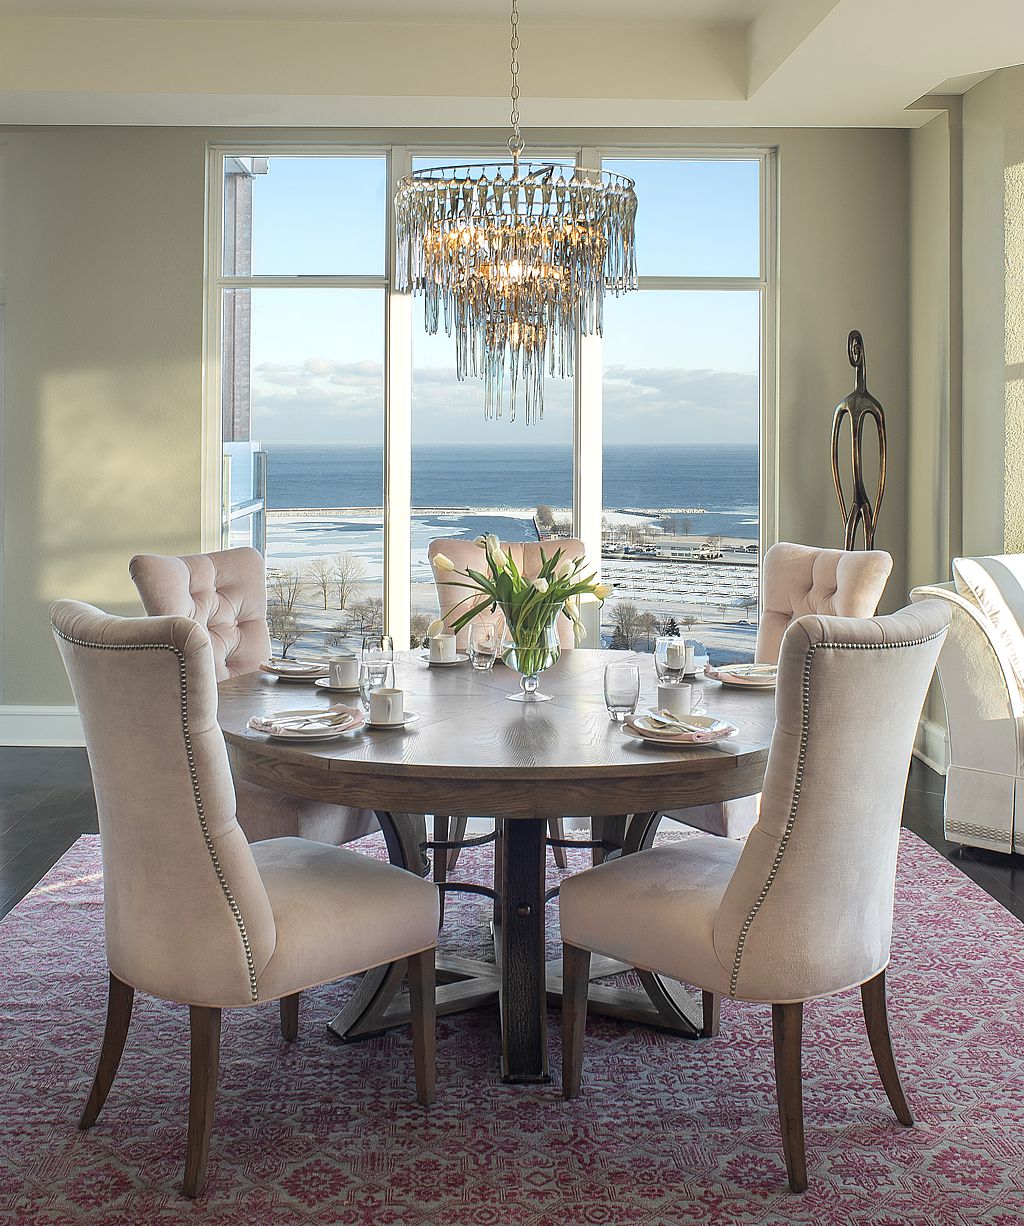 A transitional dining room overlooking water uses a soft pink velvet fabric juxtaposed with a brighter pink rug.